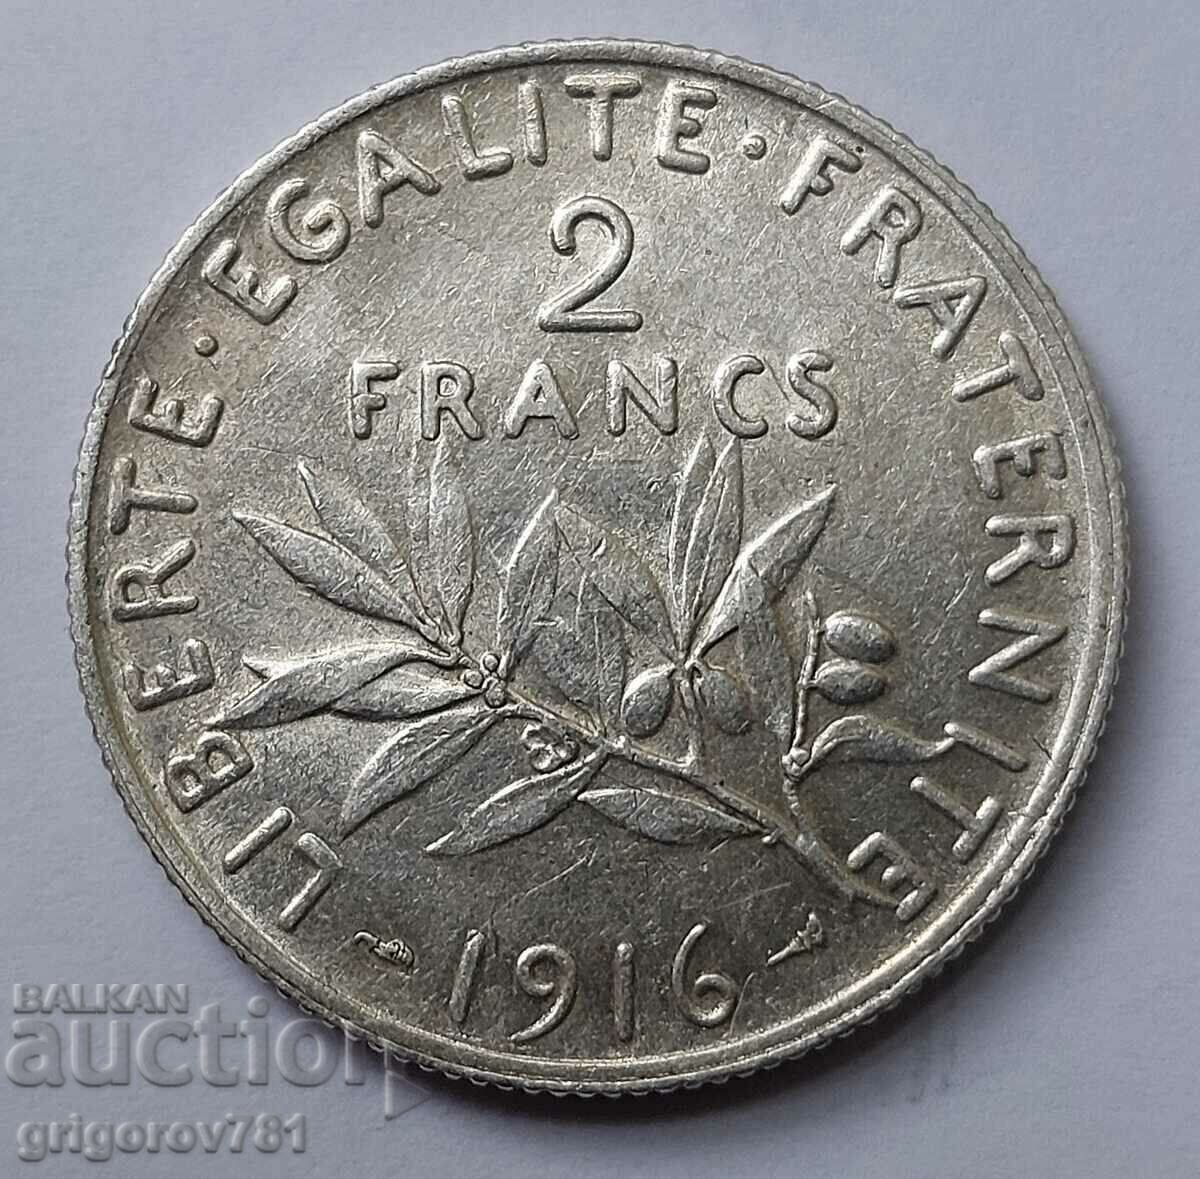 2 Francs Silver France 1916 - Silver Coin #8